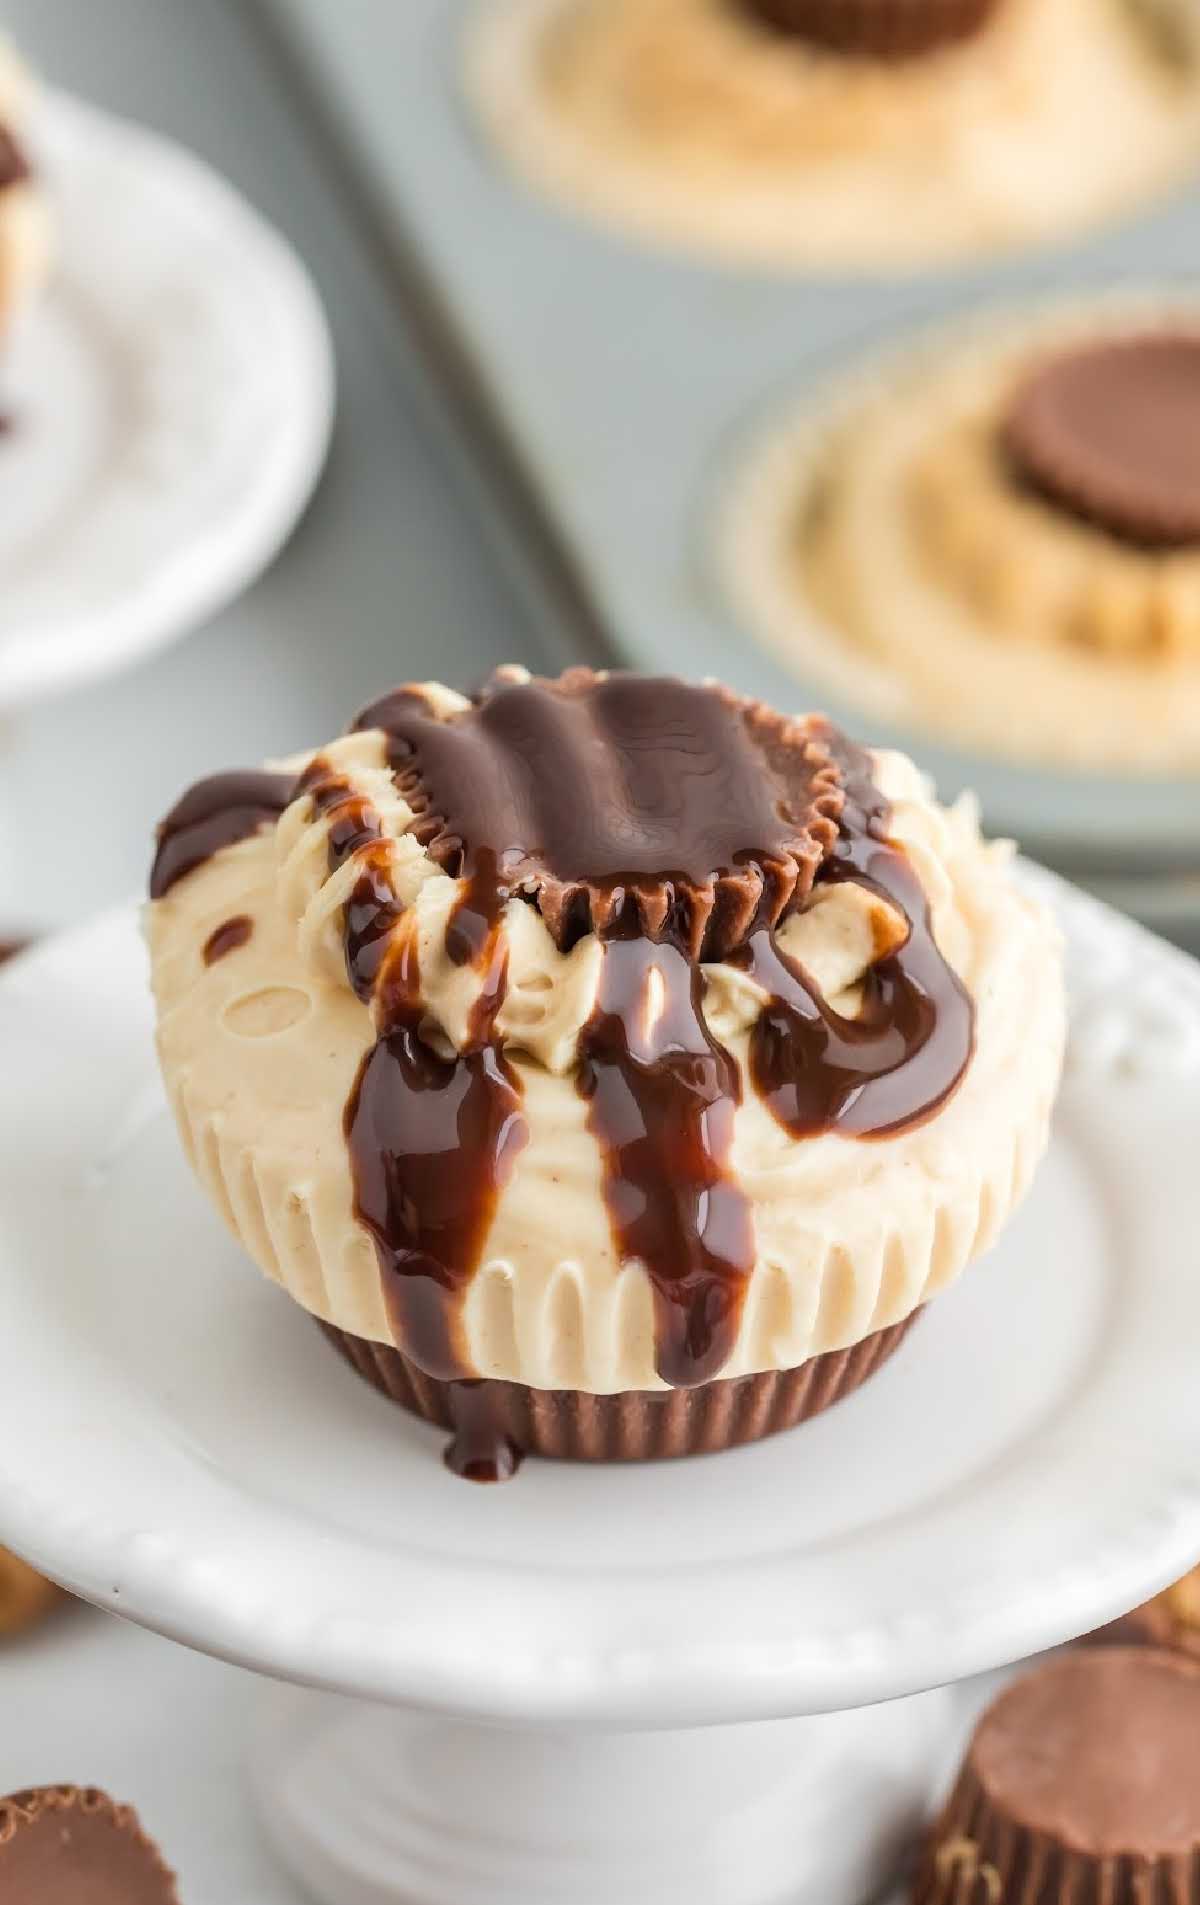 a close up shot of a Mini Peanut Butter Cheesecake drizzled with chocolate sauce on a plate